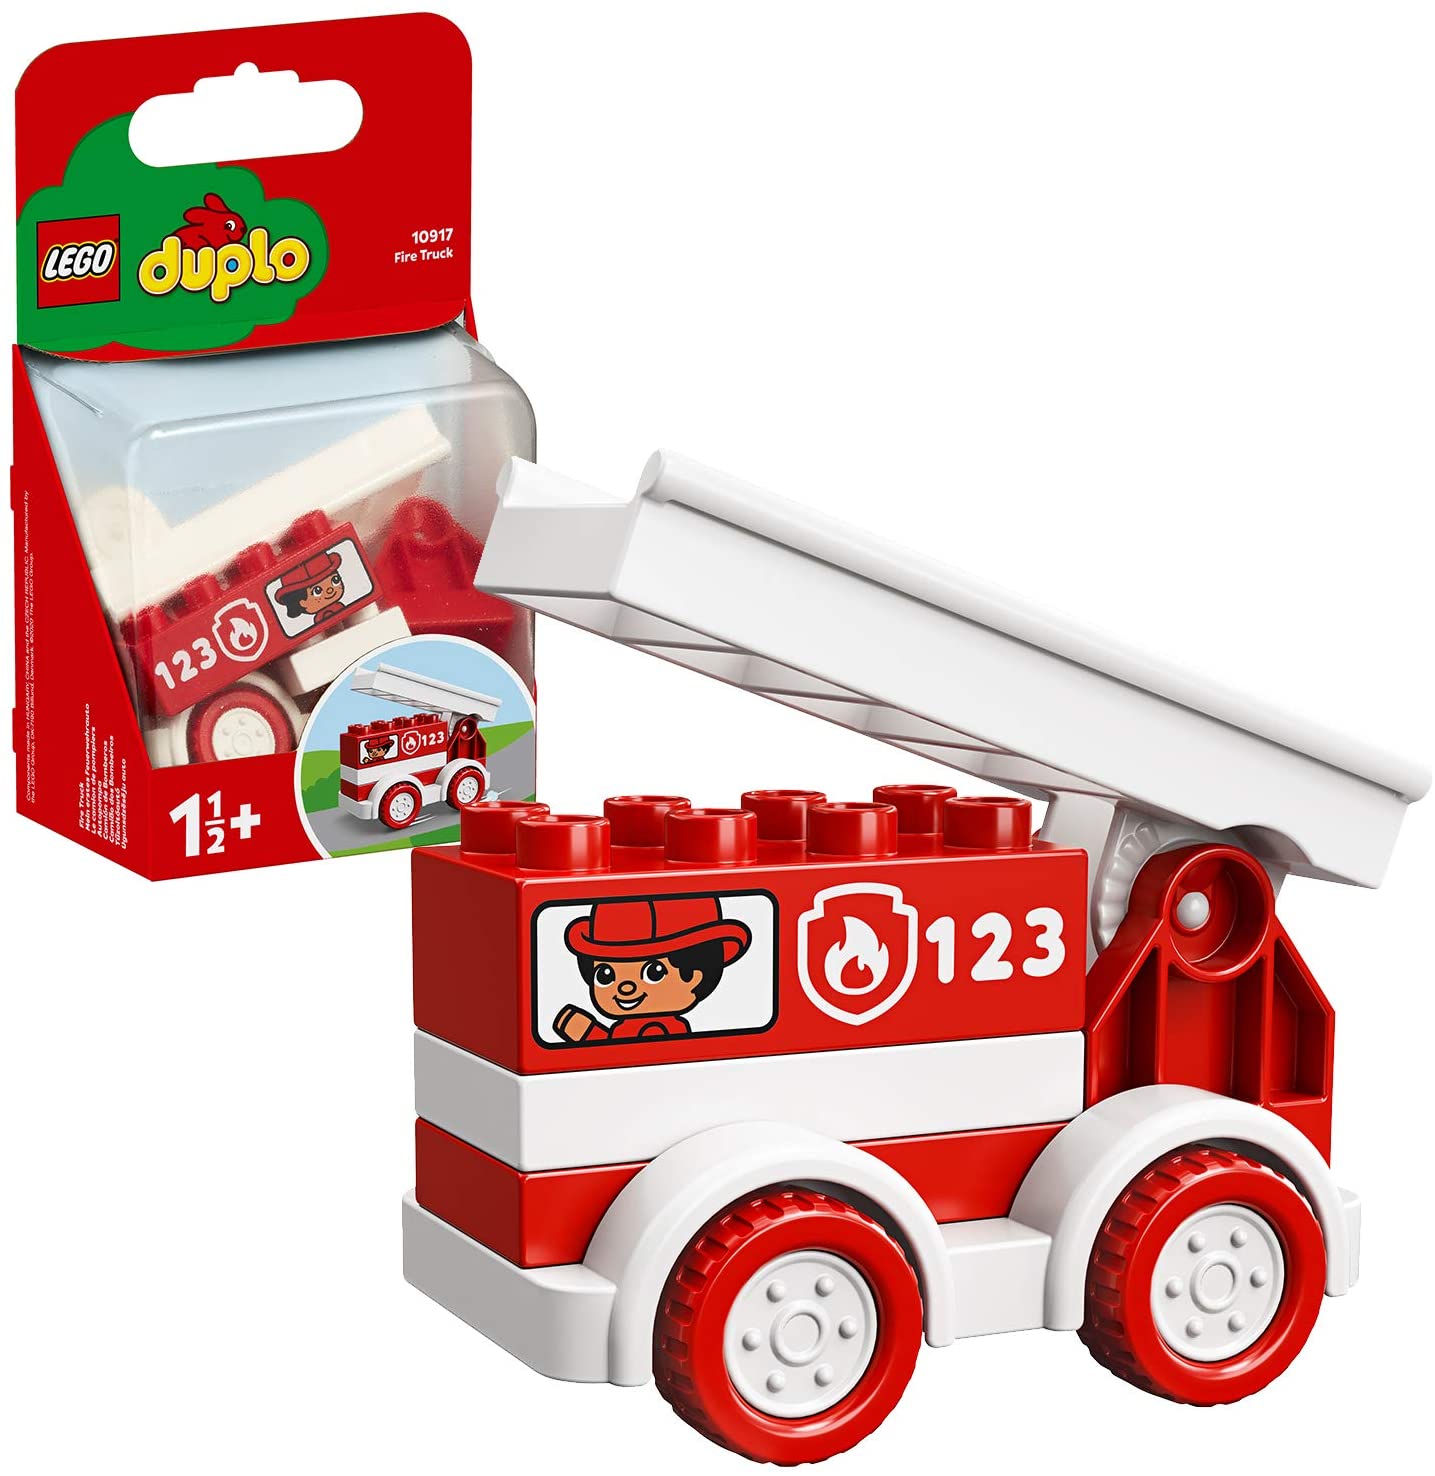 Lego 10917 Duplo my first Fire Engine Starter Kit for Toddlers Aged 1, 5 Ye